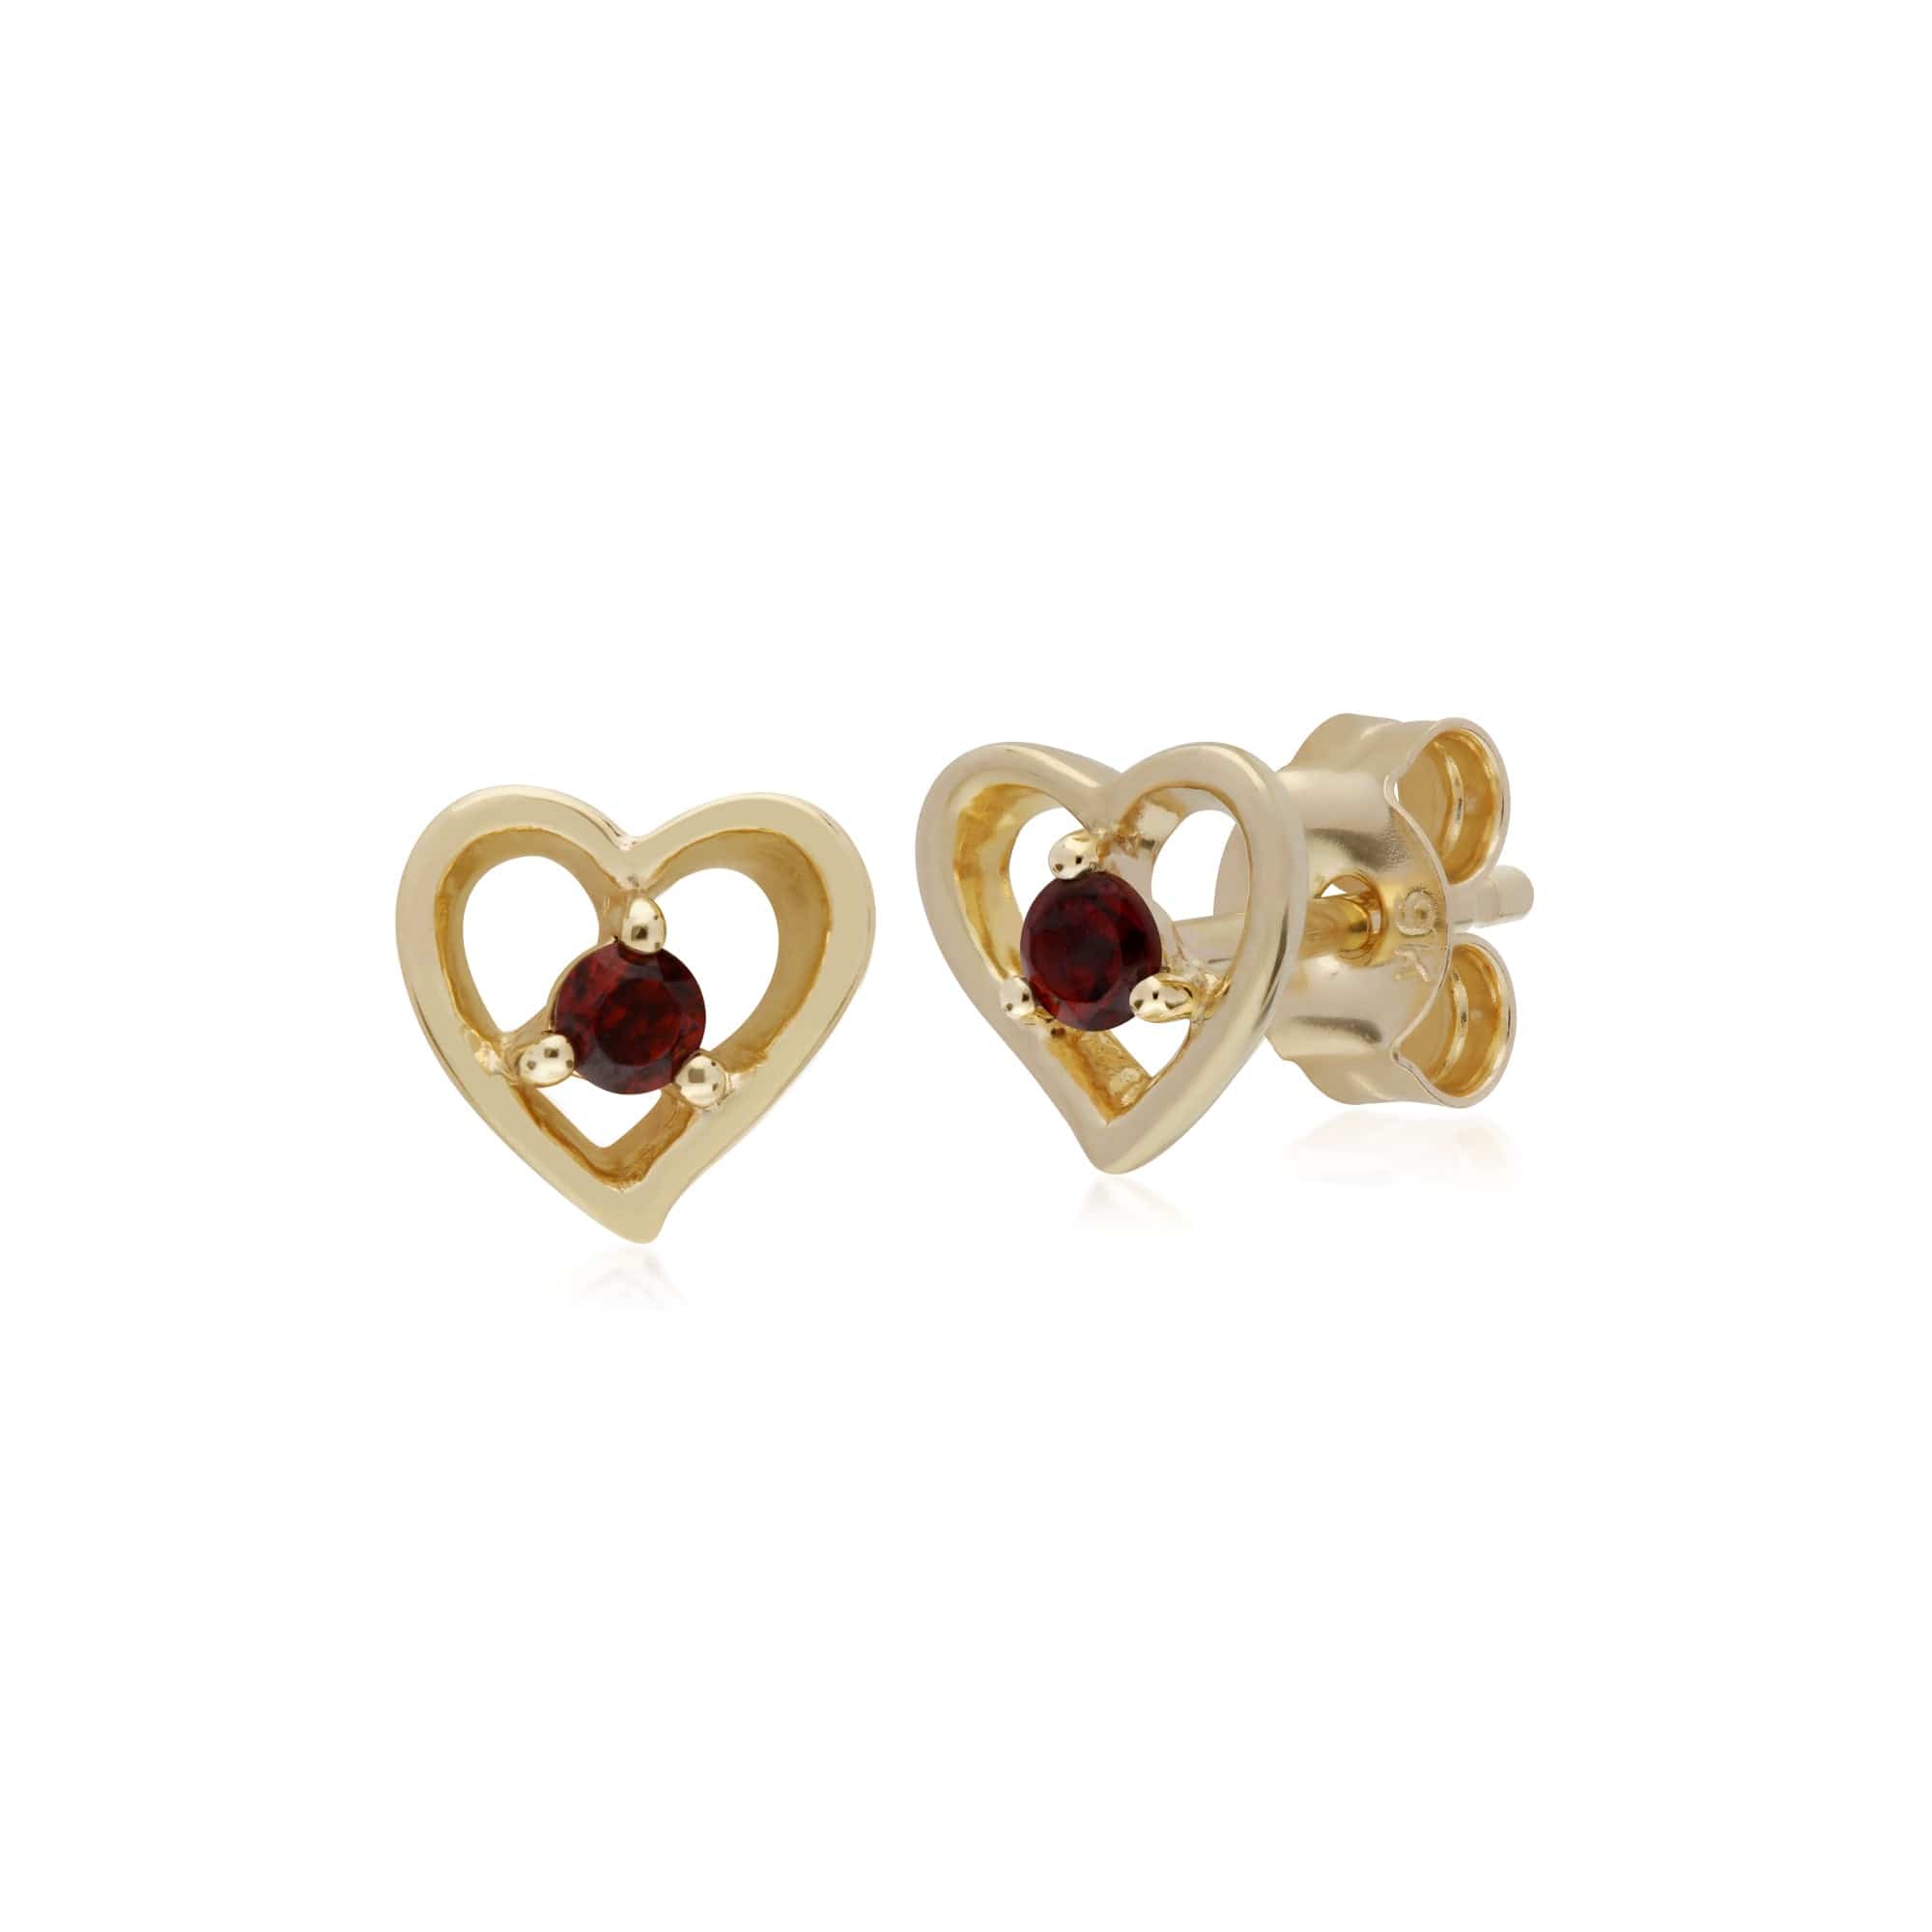 135E1521079-135P1875069 Classic Round Garnet Single Stone Heart Stud Earrings & Necklace Set in 9ct Yellow Gold 2